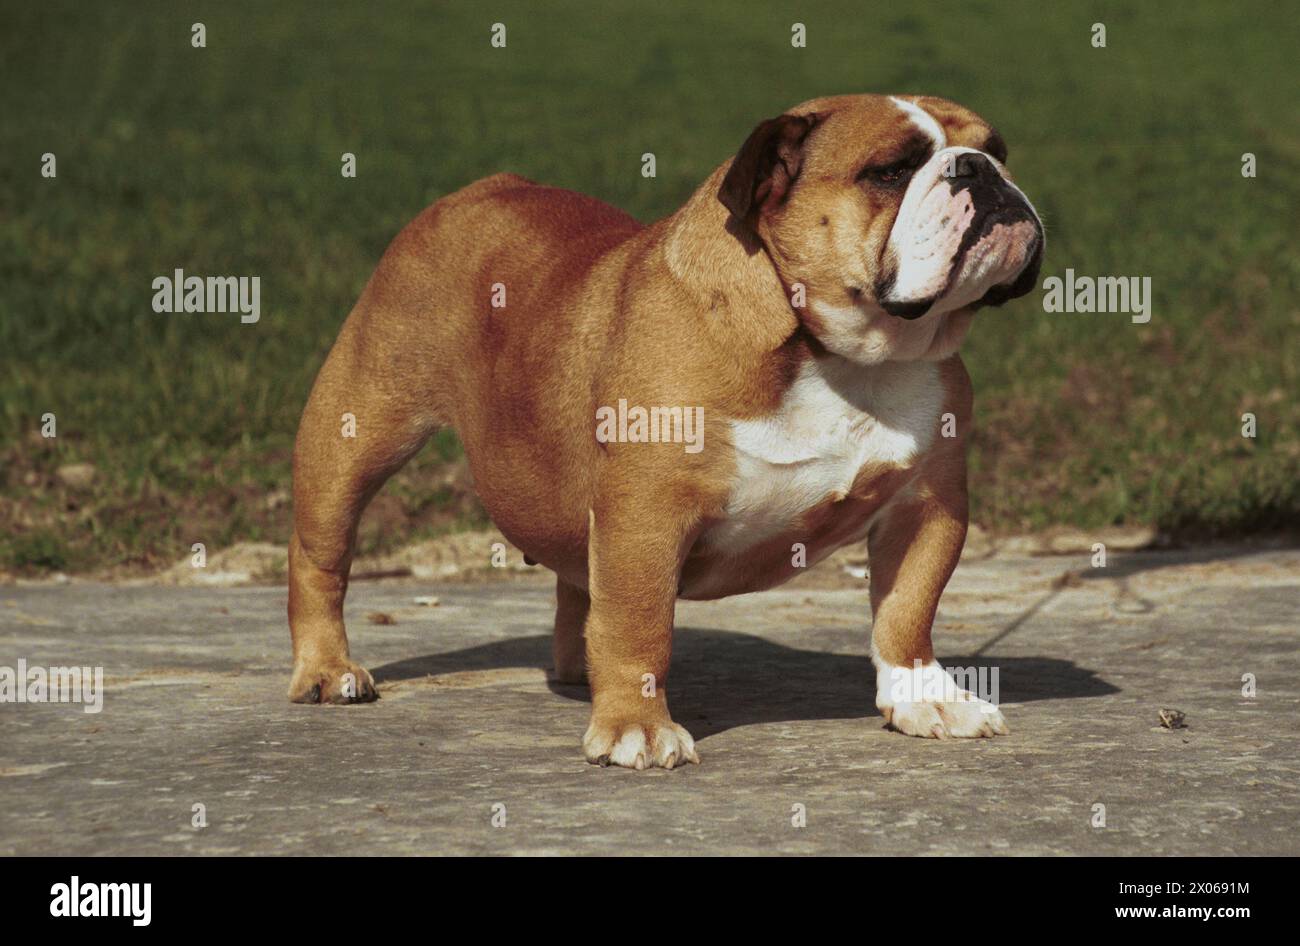 English Bulldog Red with White Dog Show Stance Stock Photo